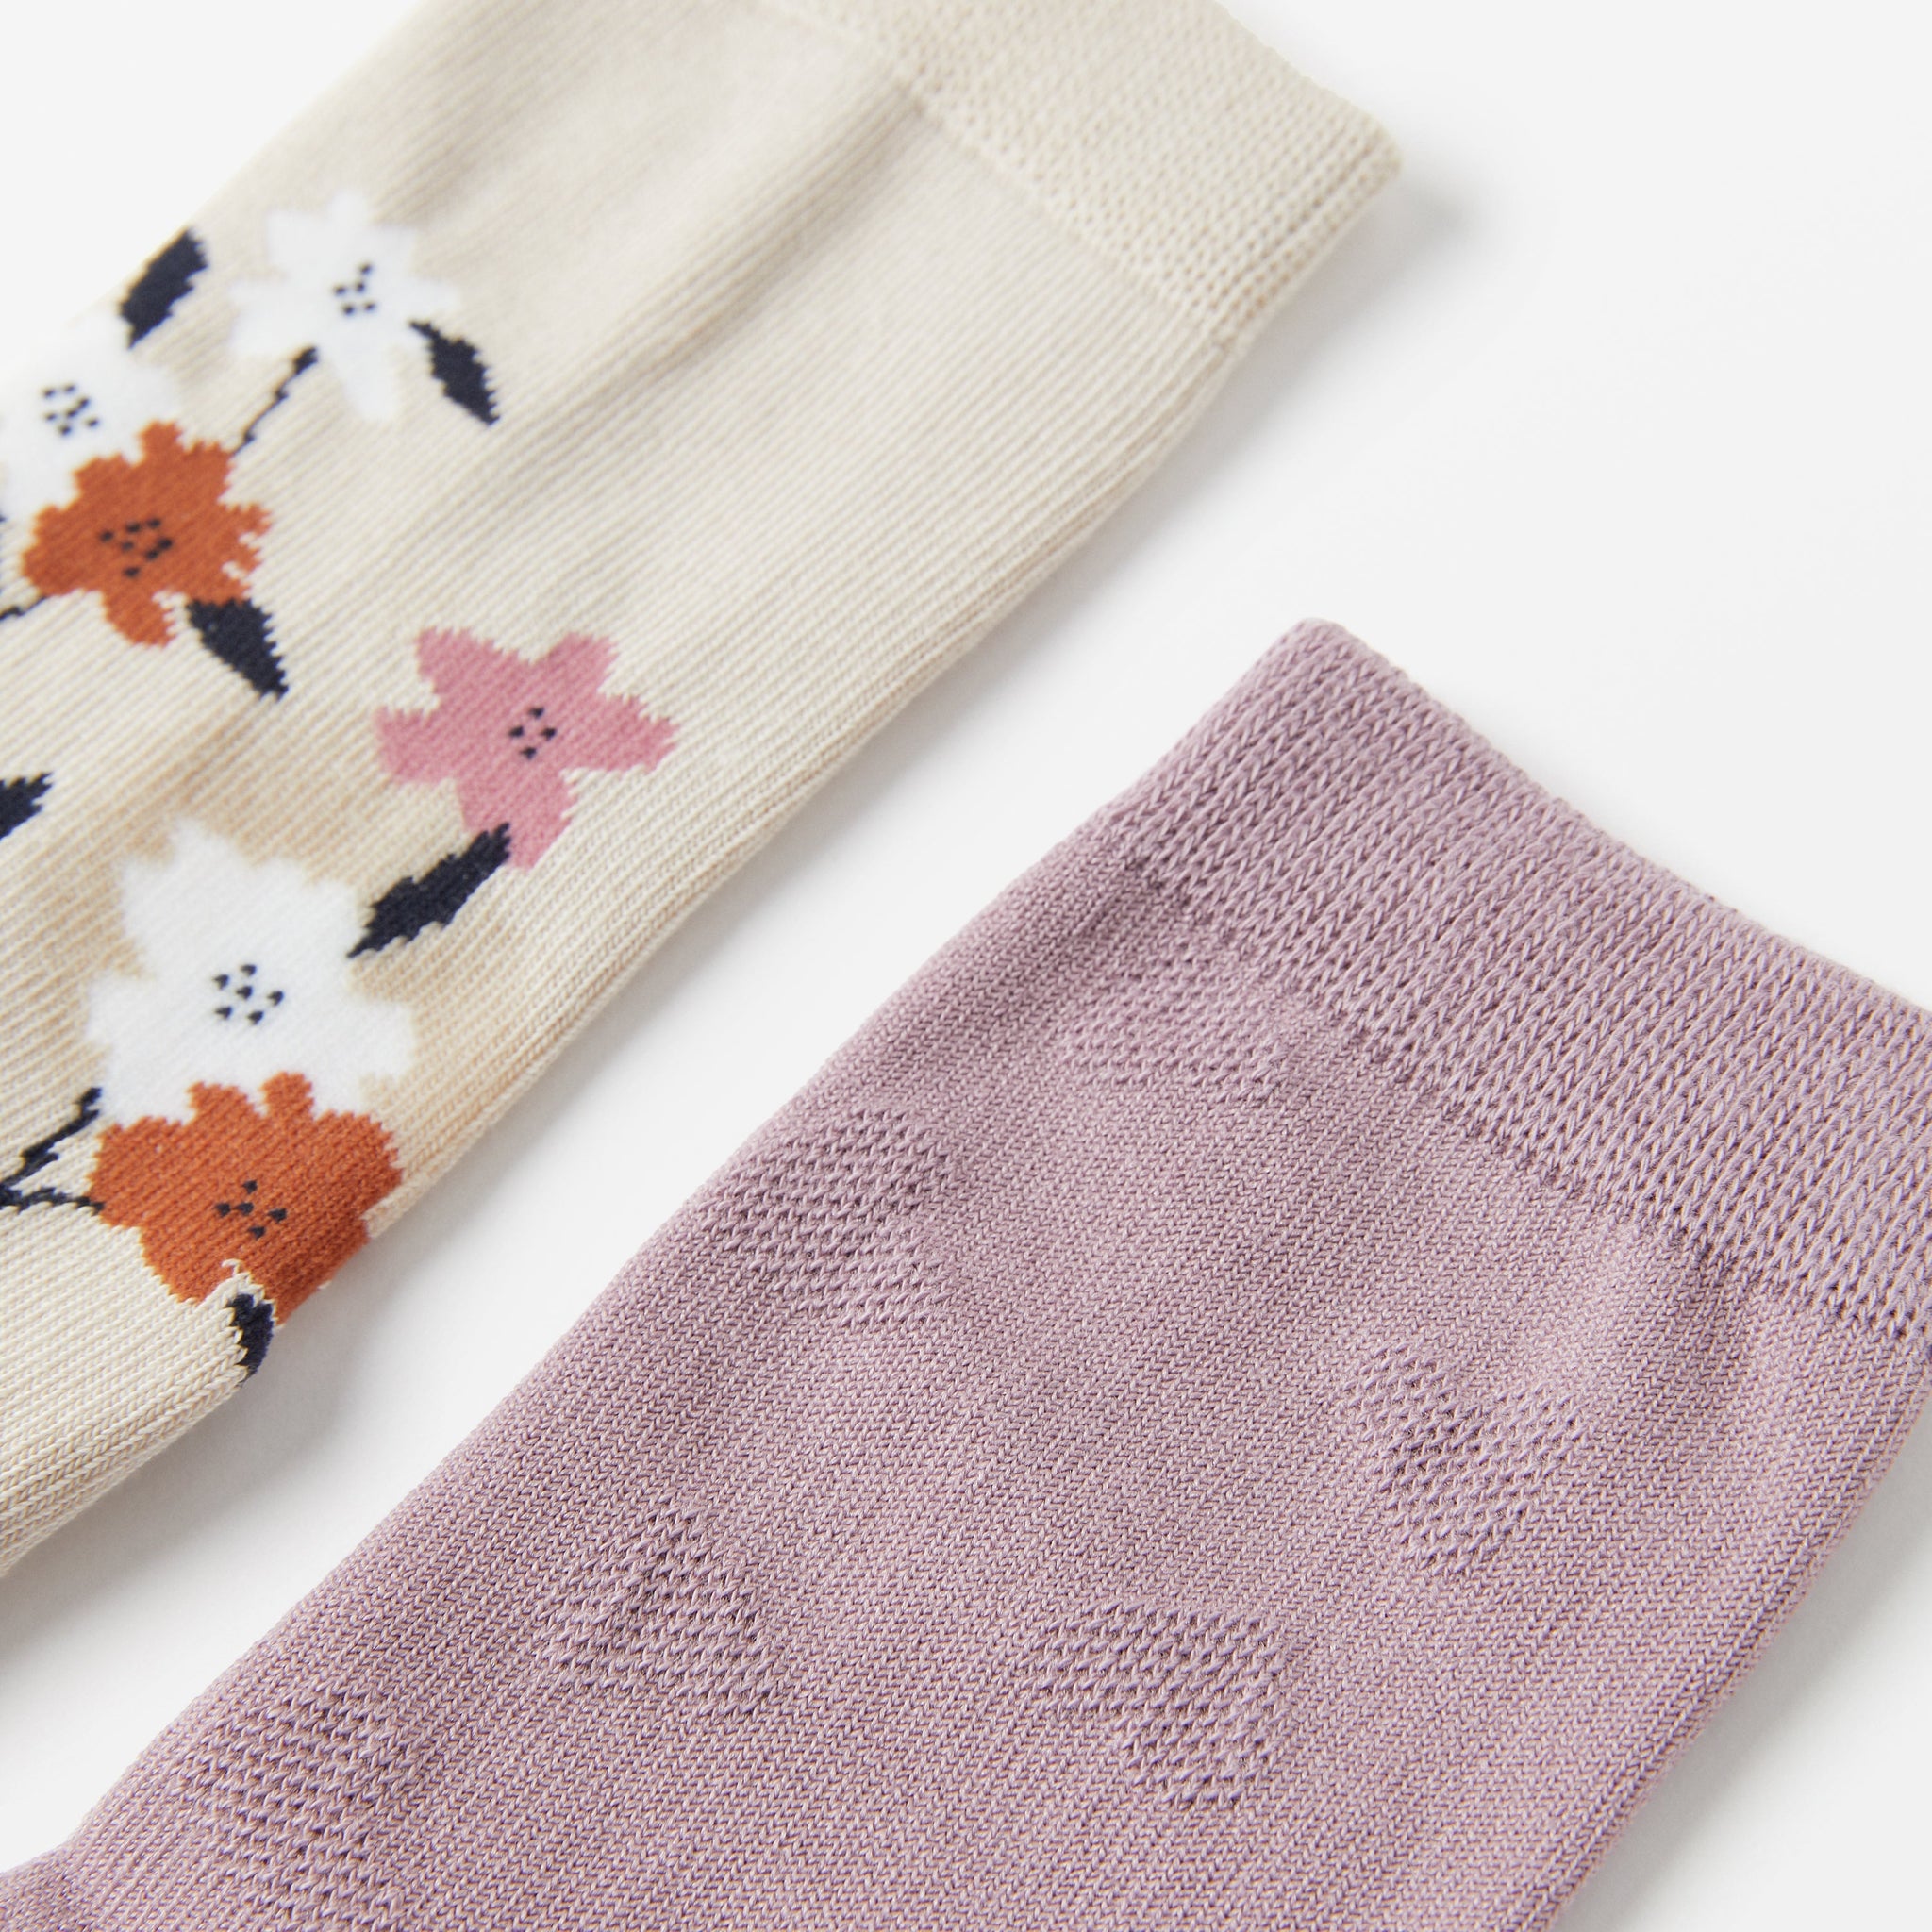 Floral Kids Socks Multipack from the Polarn O. Pyret kidswear collection. Nordic kids clothes made from sustainable sources.